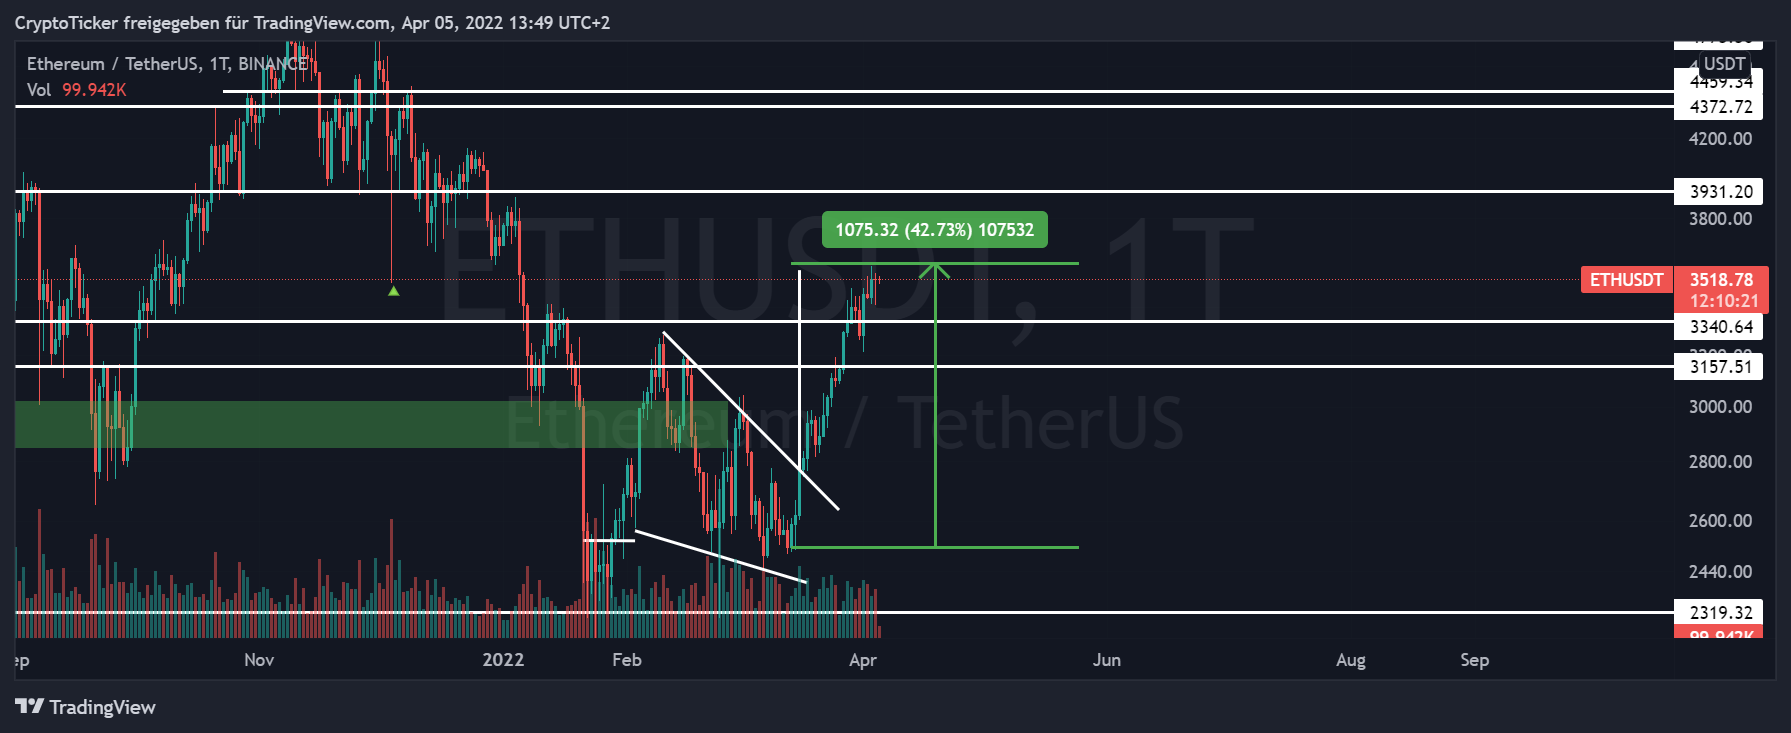 ETH/USDT 1-day chart showing the current rise in ETH prices 